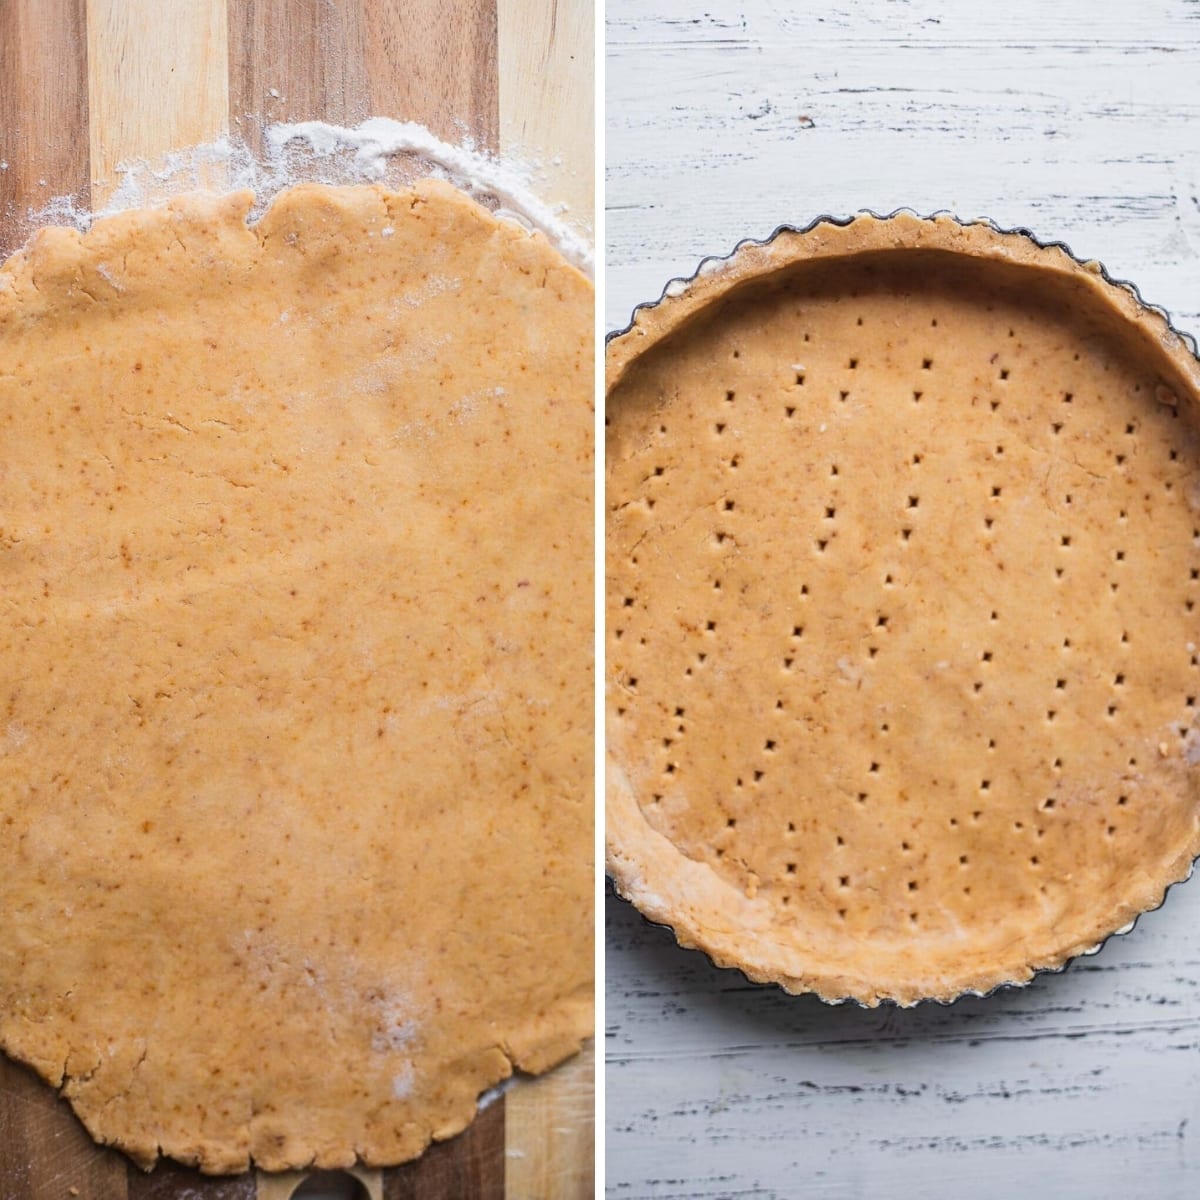 Poke a few rows of holes in the crust using a fork